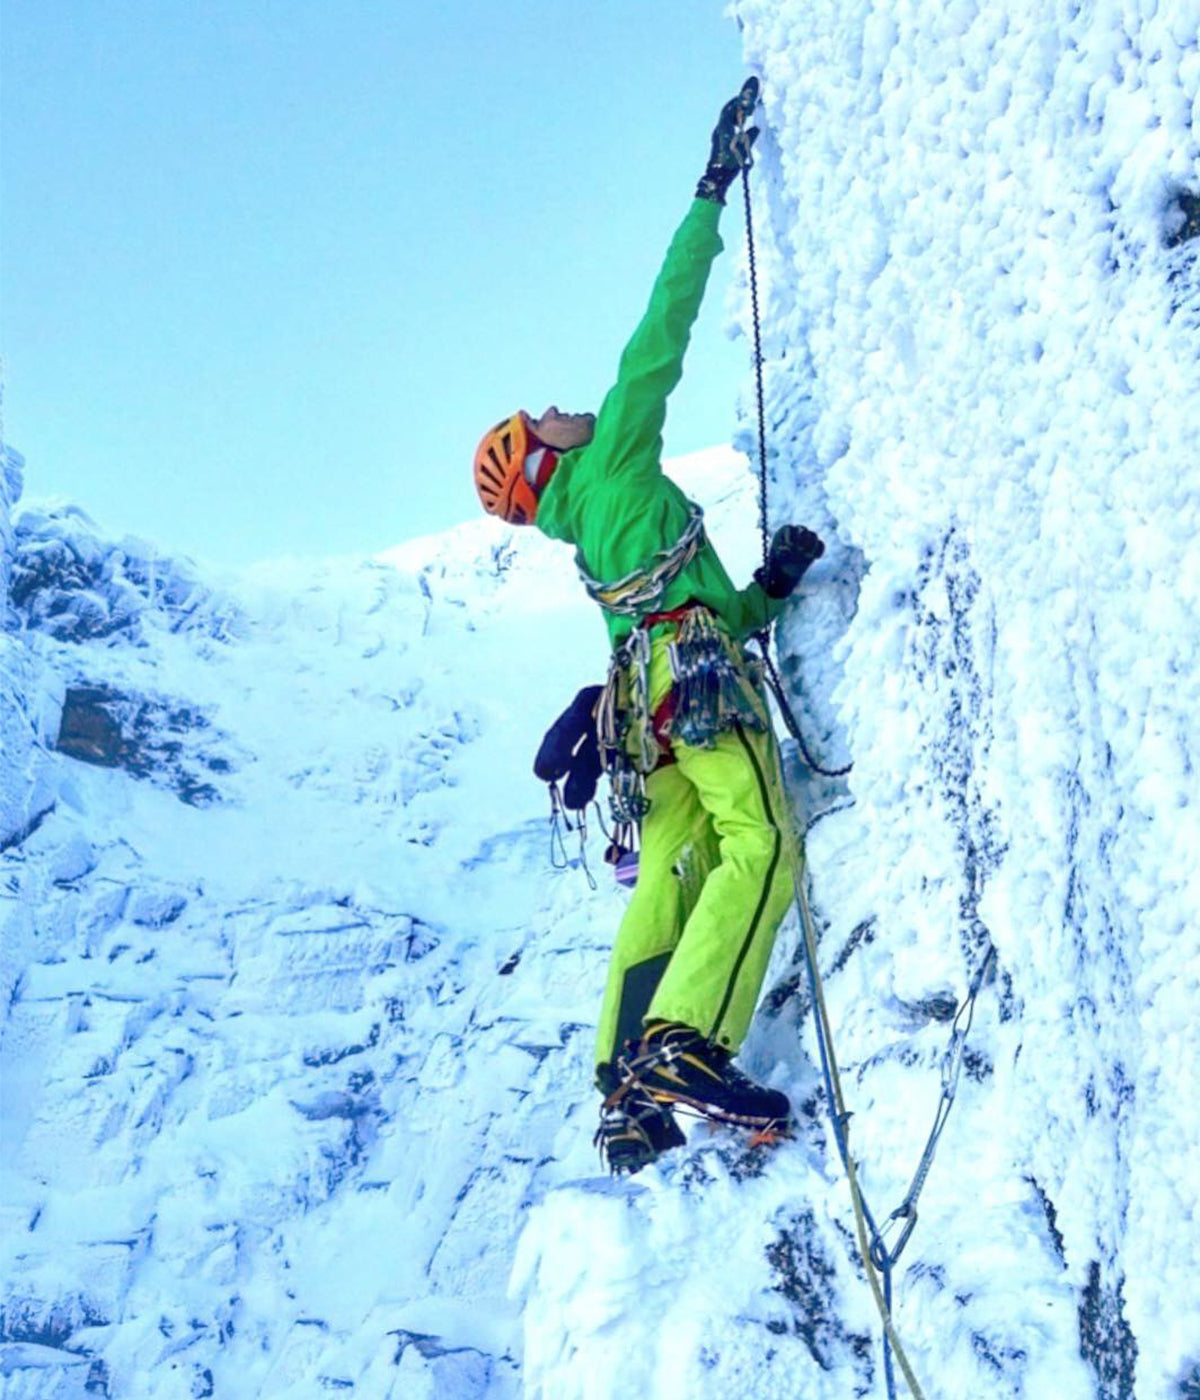 Climber looks for holds on steep Scottish mixed climb